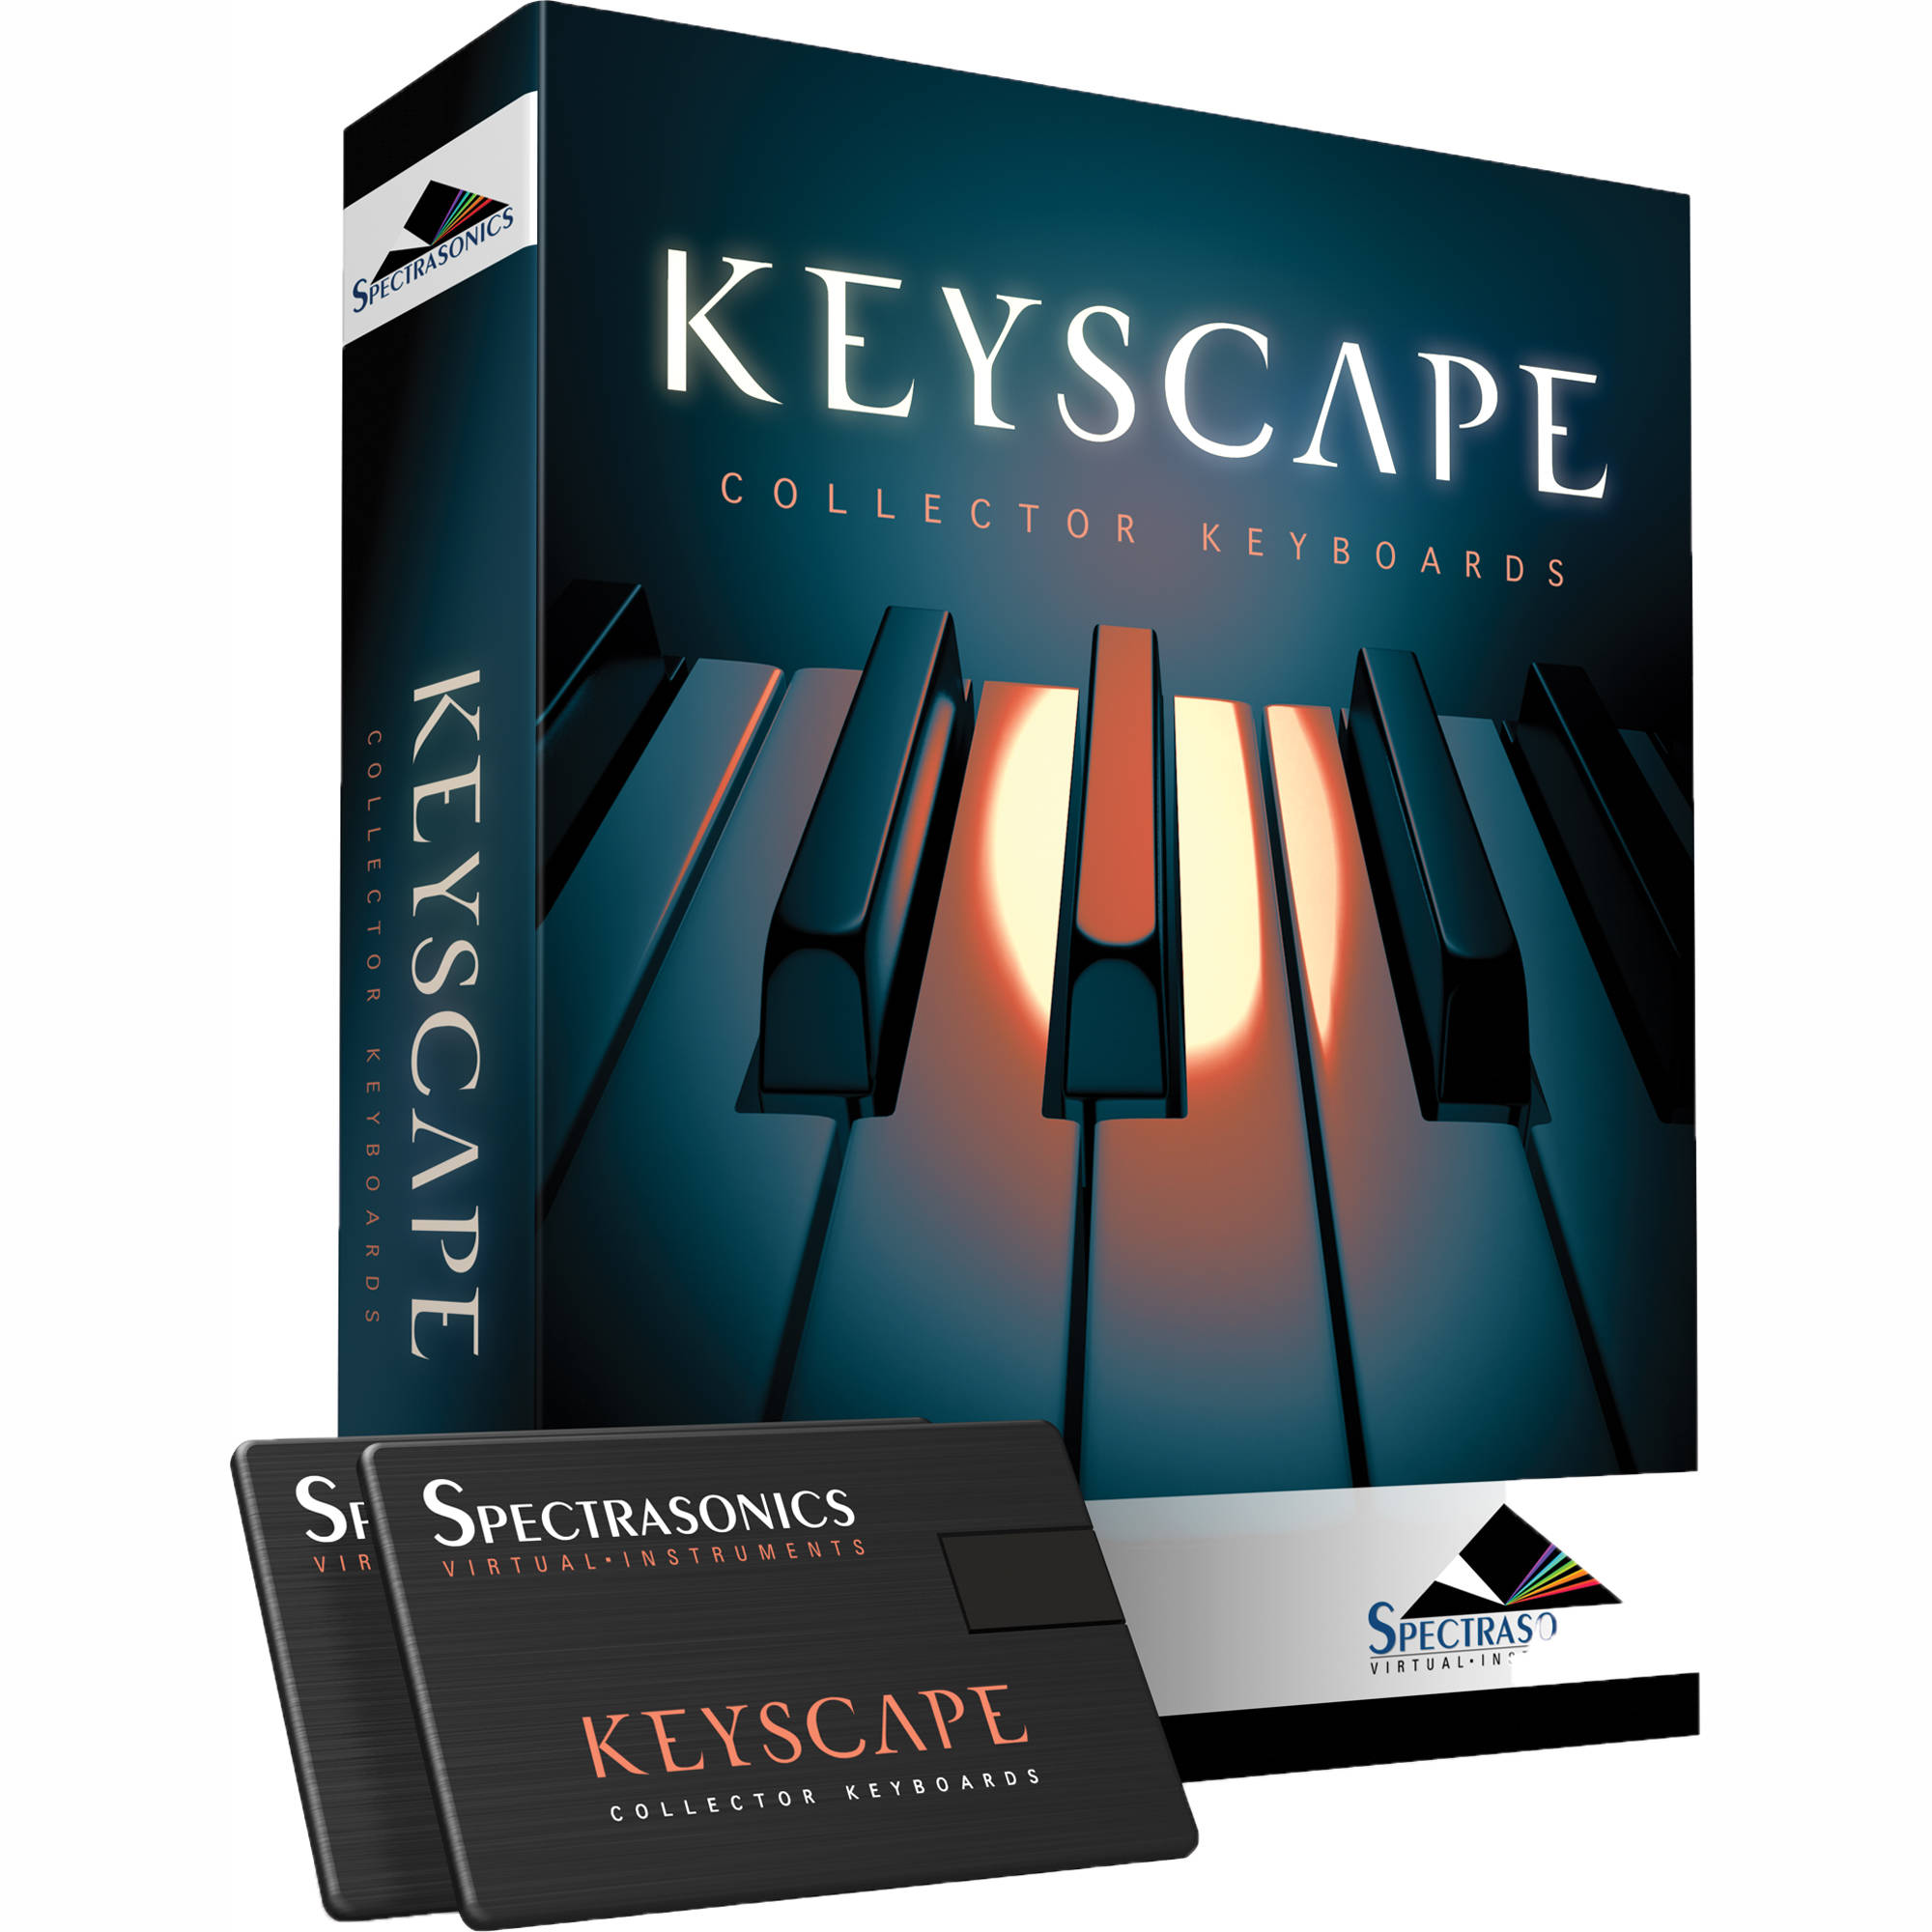 Spectrasonics Keyscape 1.1.3c Cracked With Serial Key Free Download [2021]